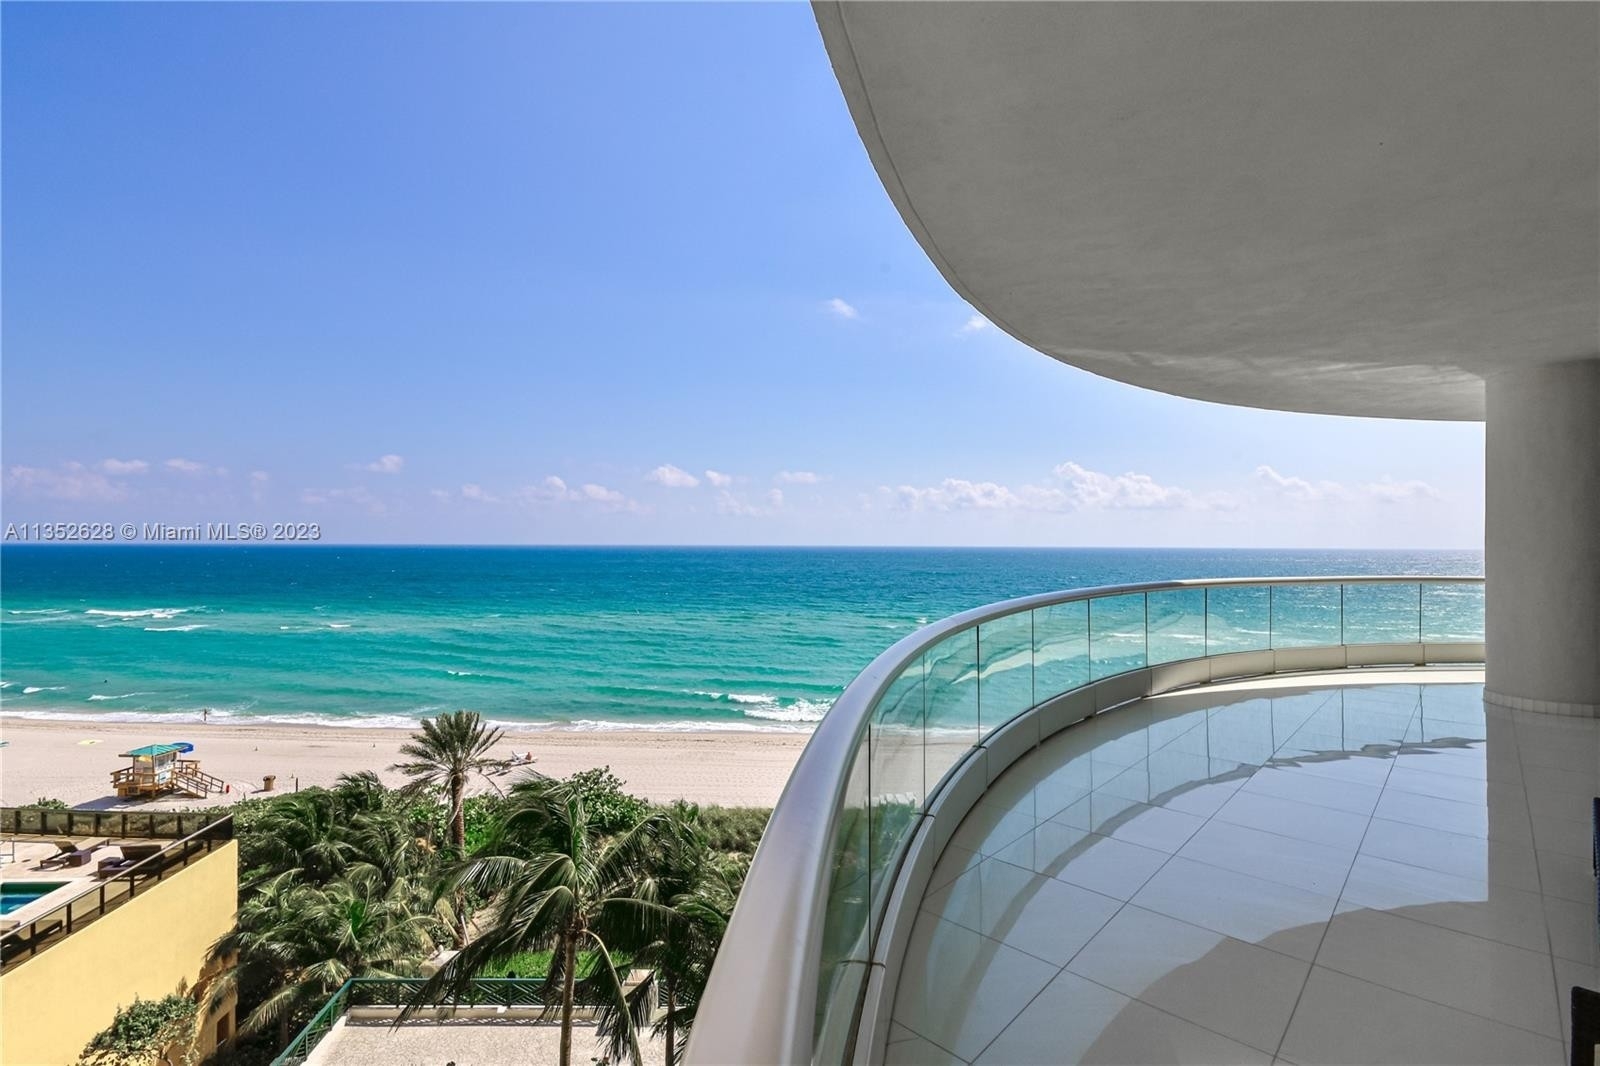 10. Condominiums for Sale at 16051 Collins Ave, 704 Sunny Isles Beach, FL 33160